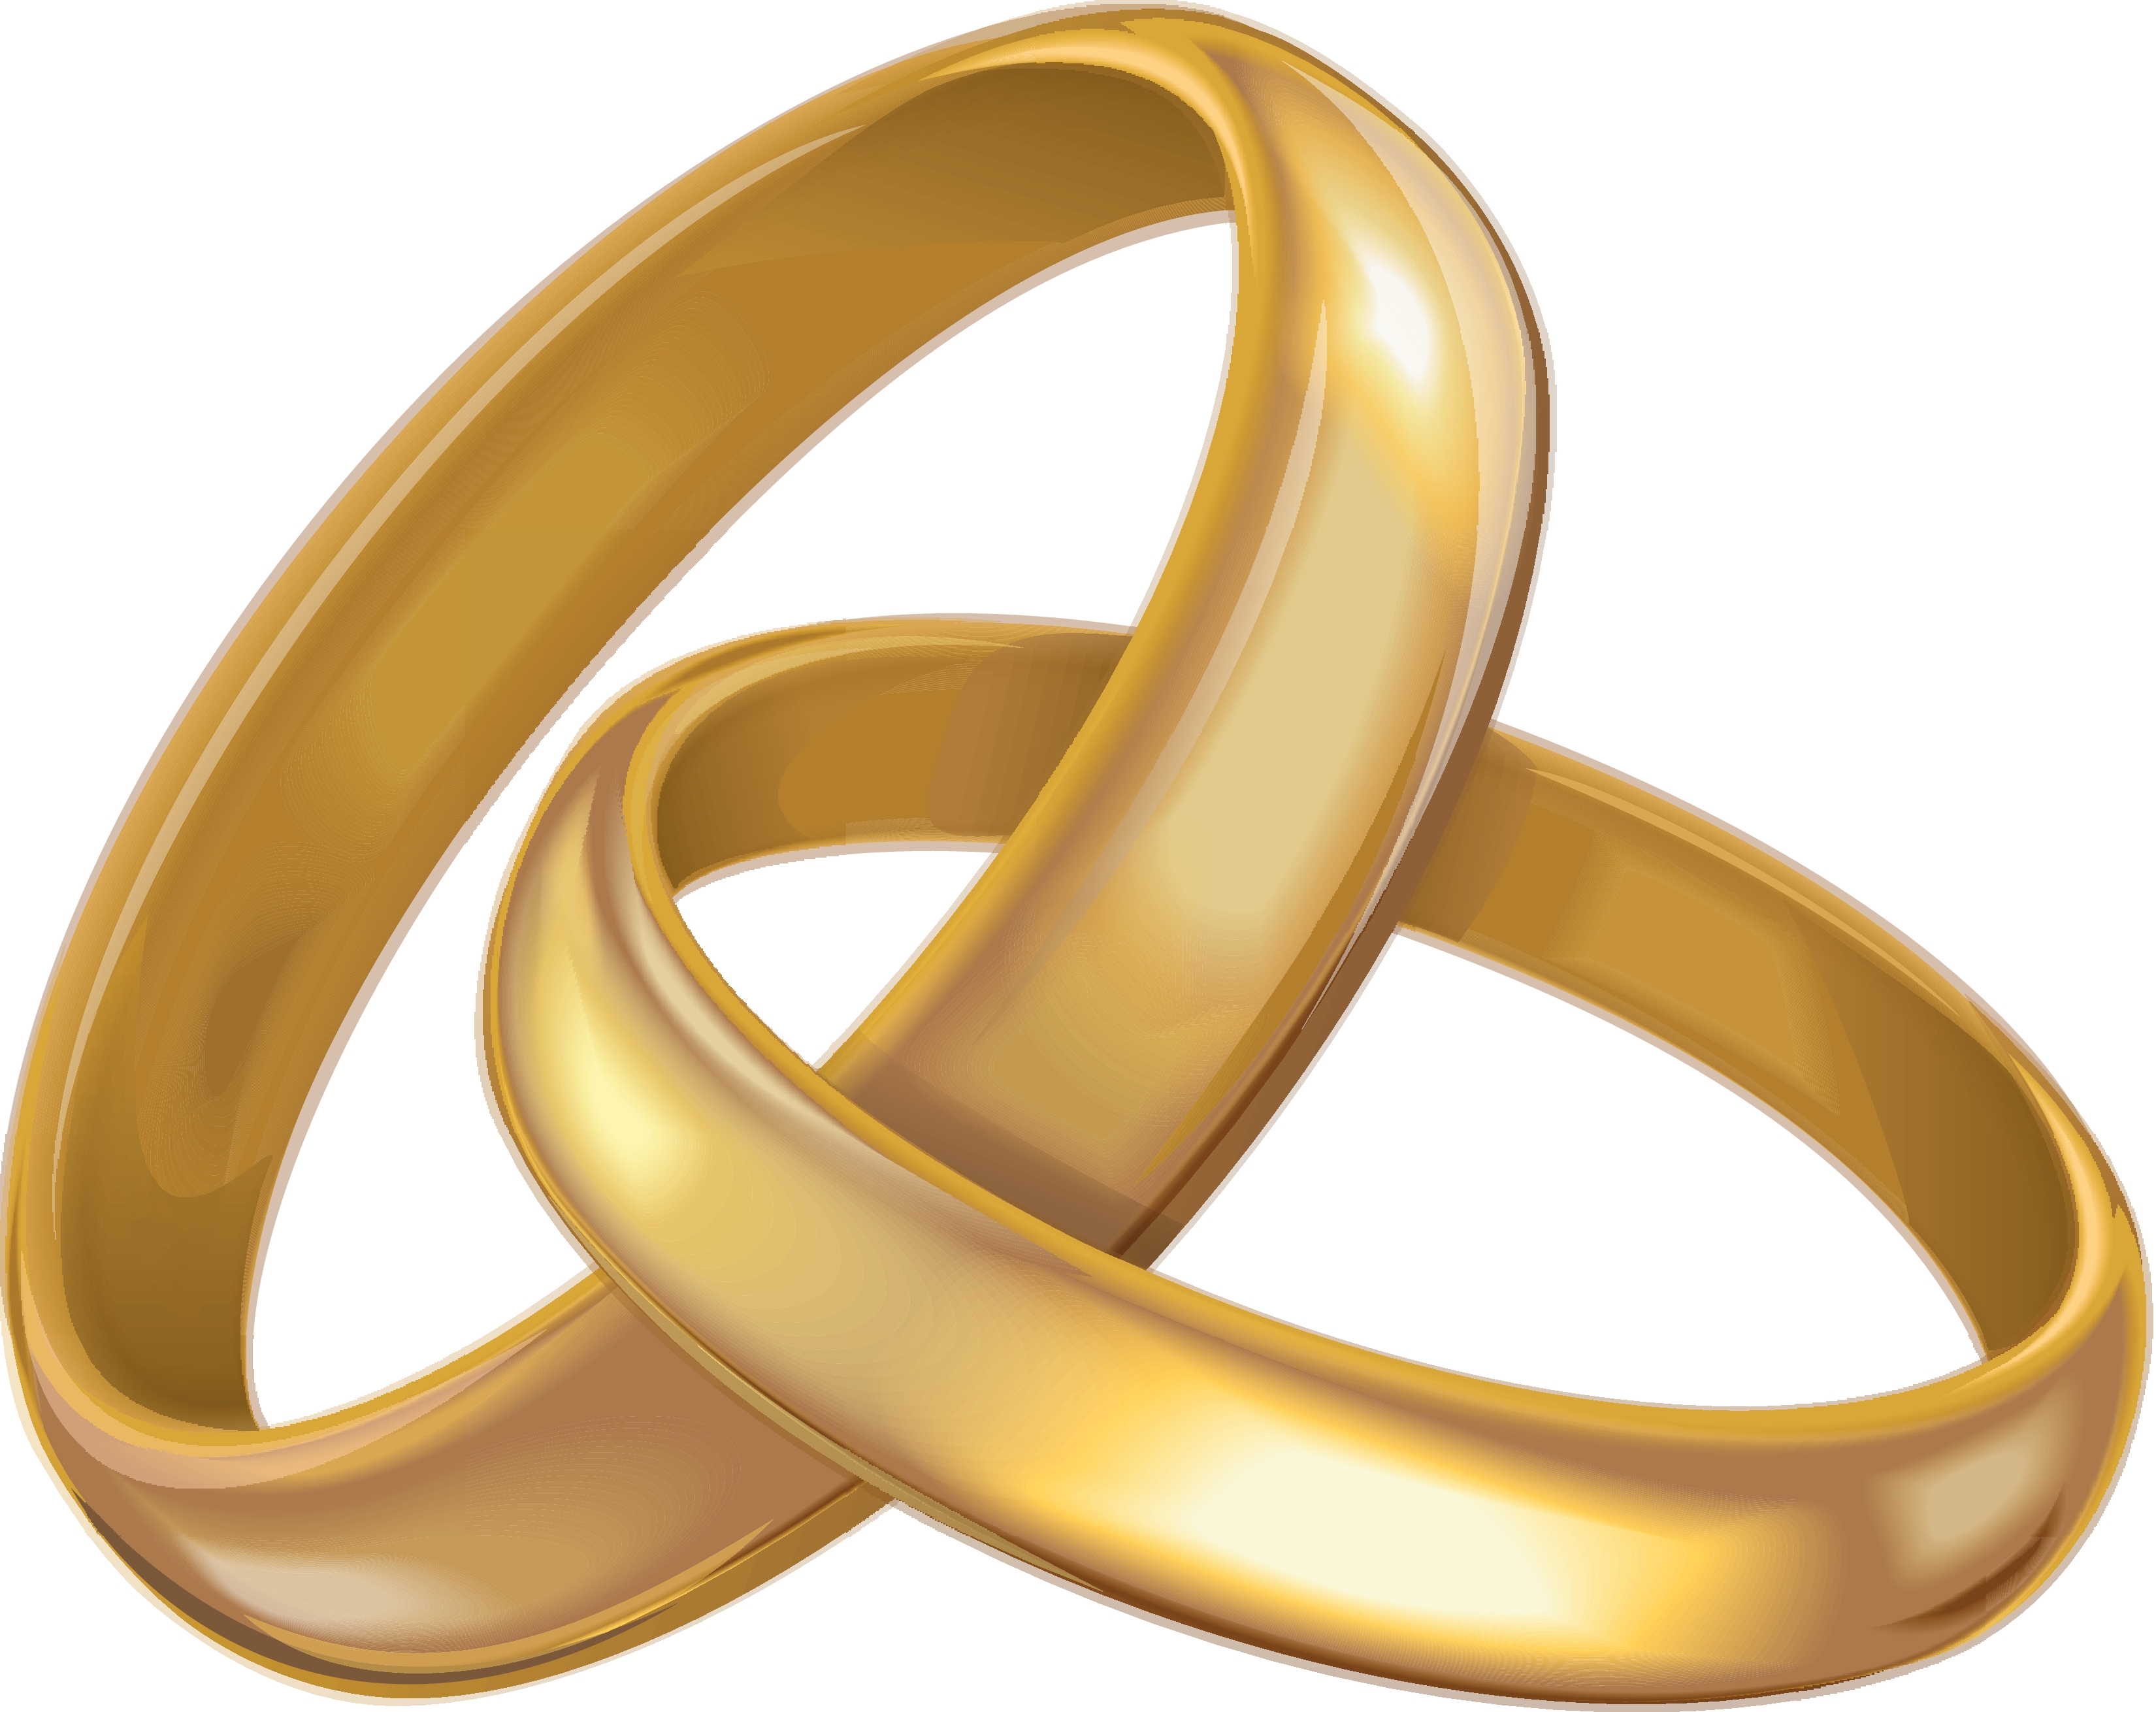 Wedding ring clip art pictures free clipart images 2 clipartcow